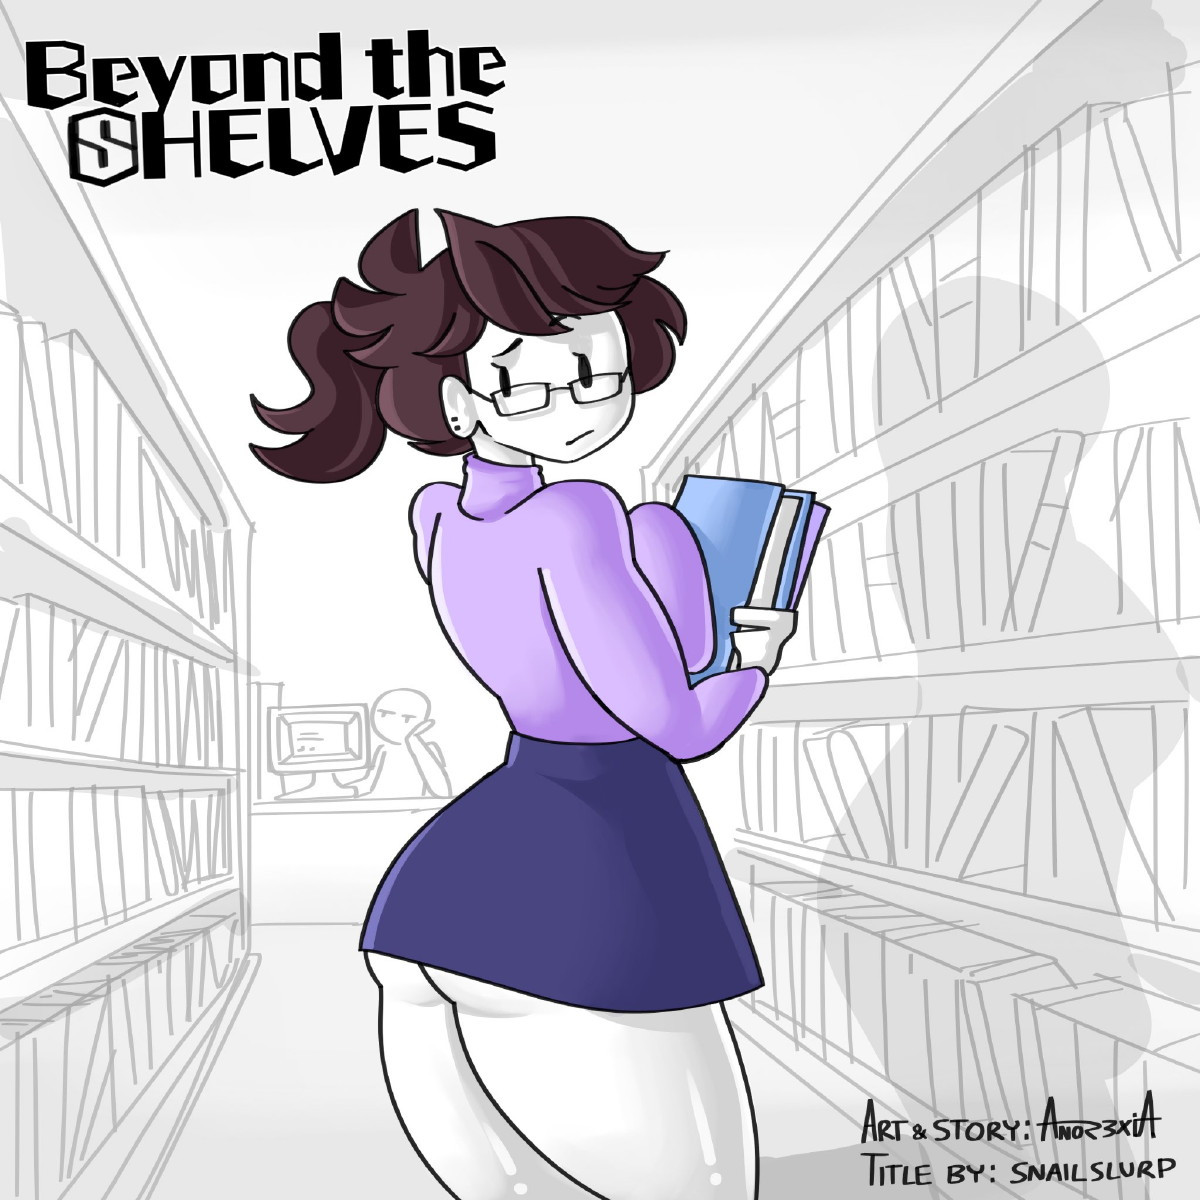 [Anor3xiA] Beyond the Shelves